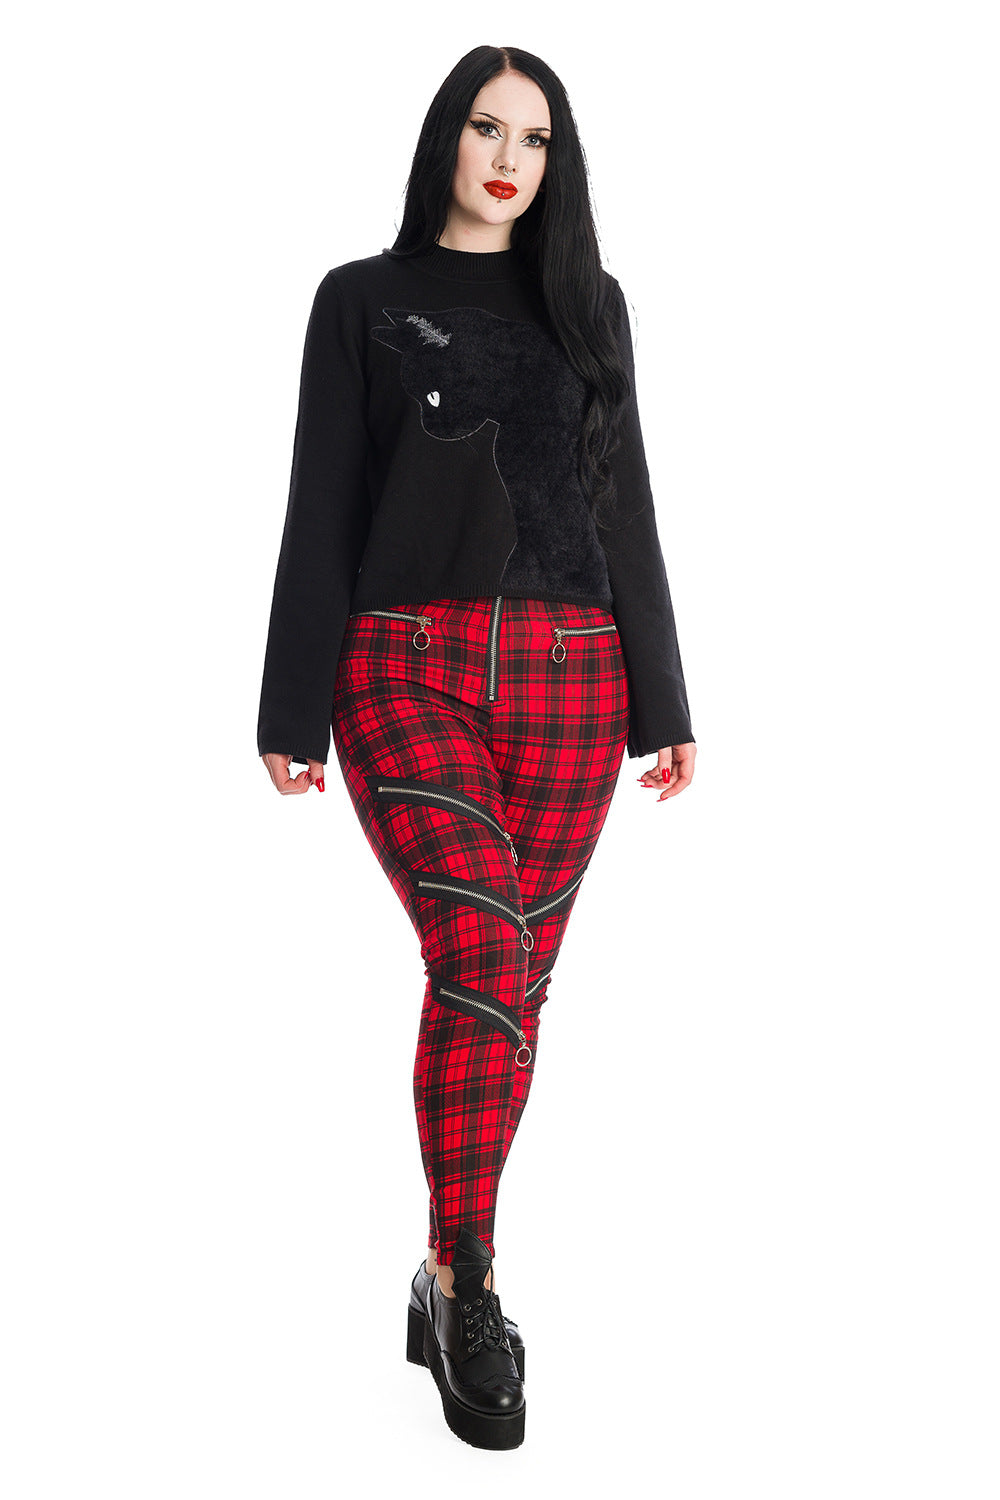 Model wear black jumper with black cat and High waisted red check trousers with zip details on legs 